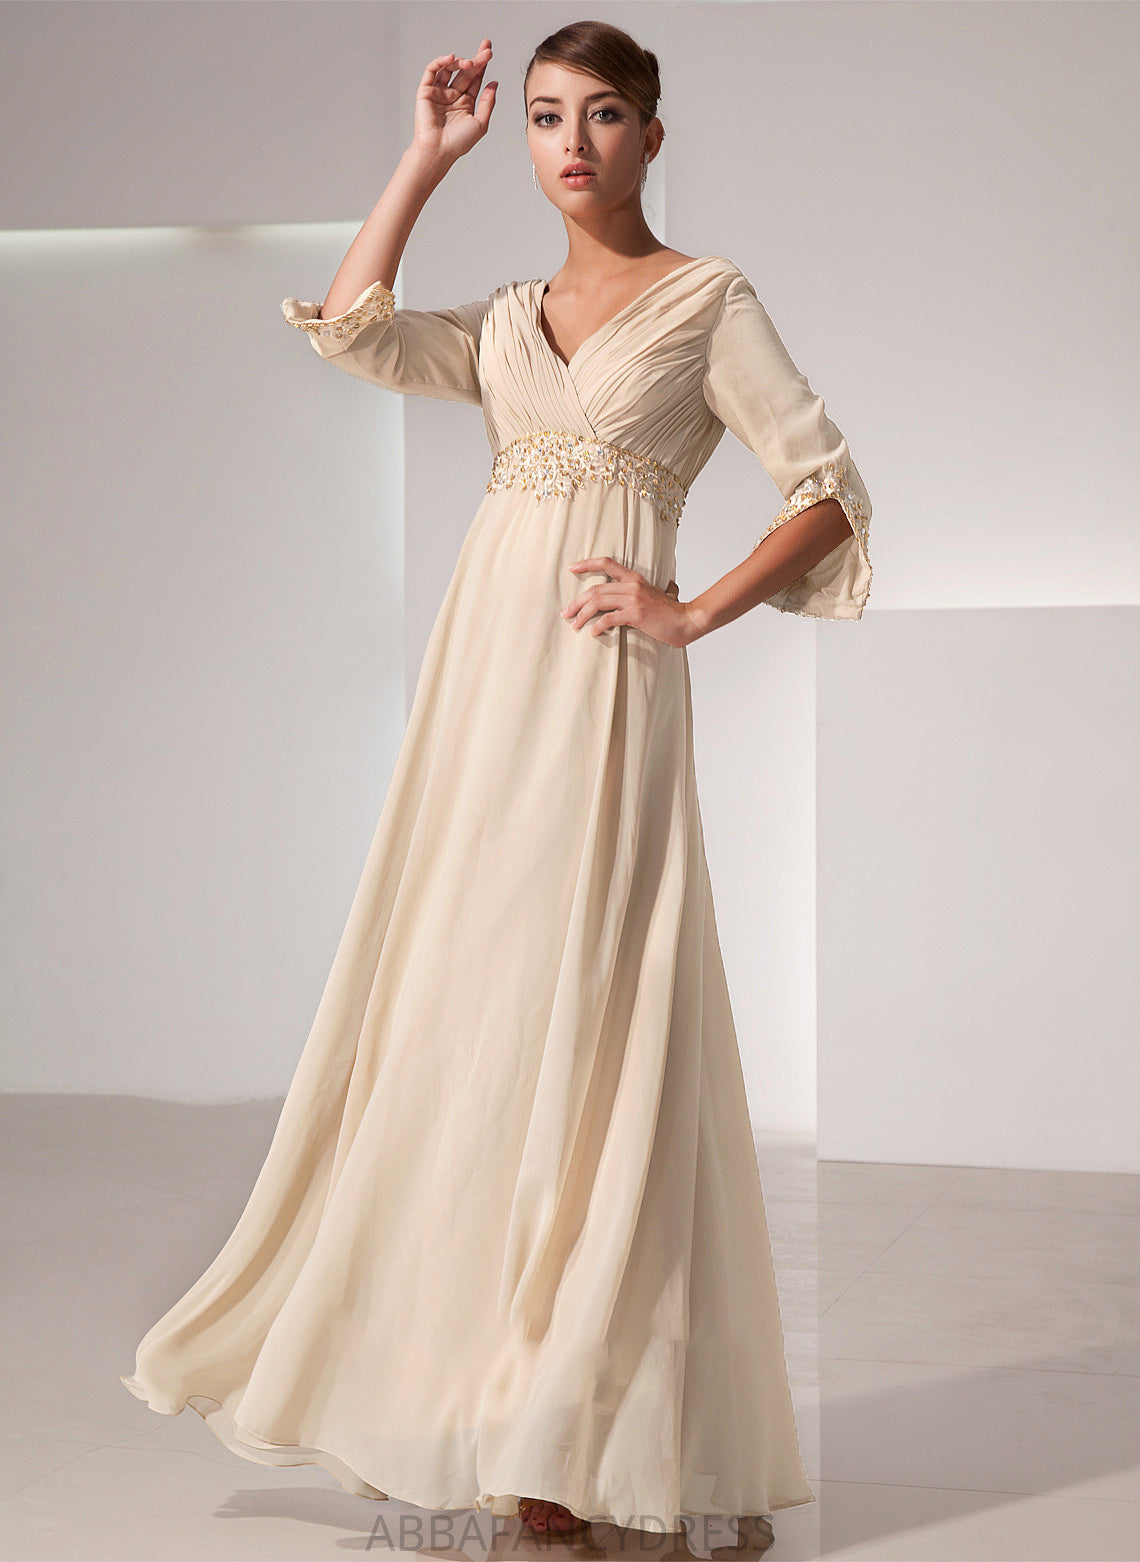 Beading Mother of the Bride Dresses the Dress With Alisa Bride of Chiffon Floor-Length V-neck Empire Ruffle Mother